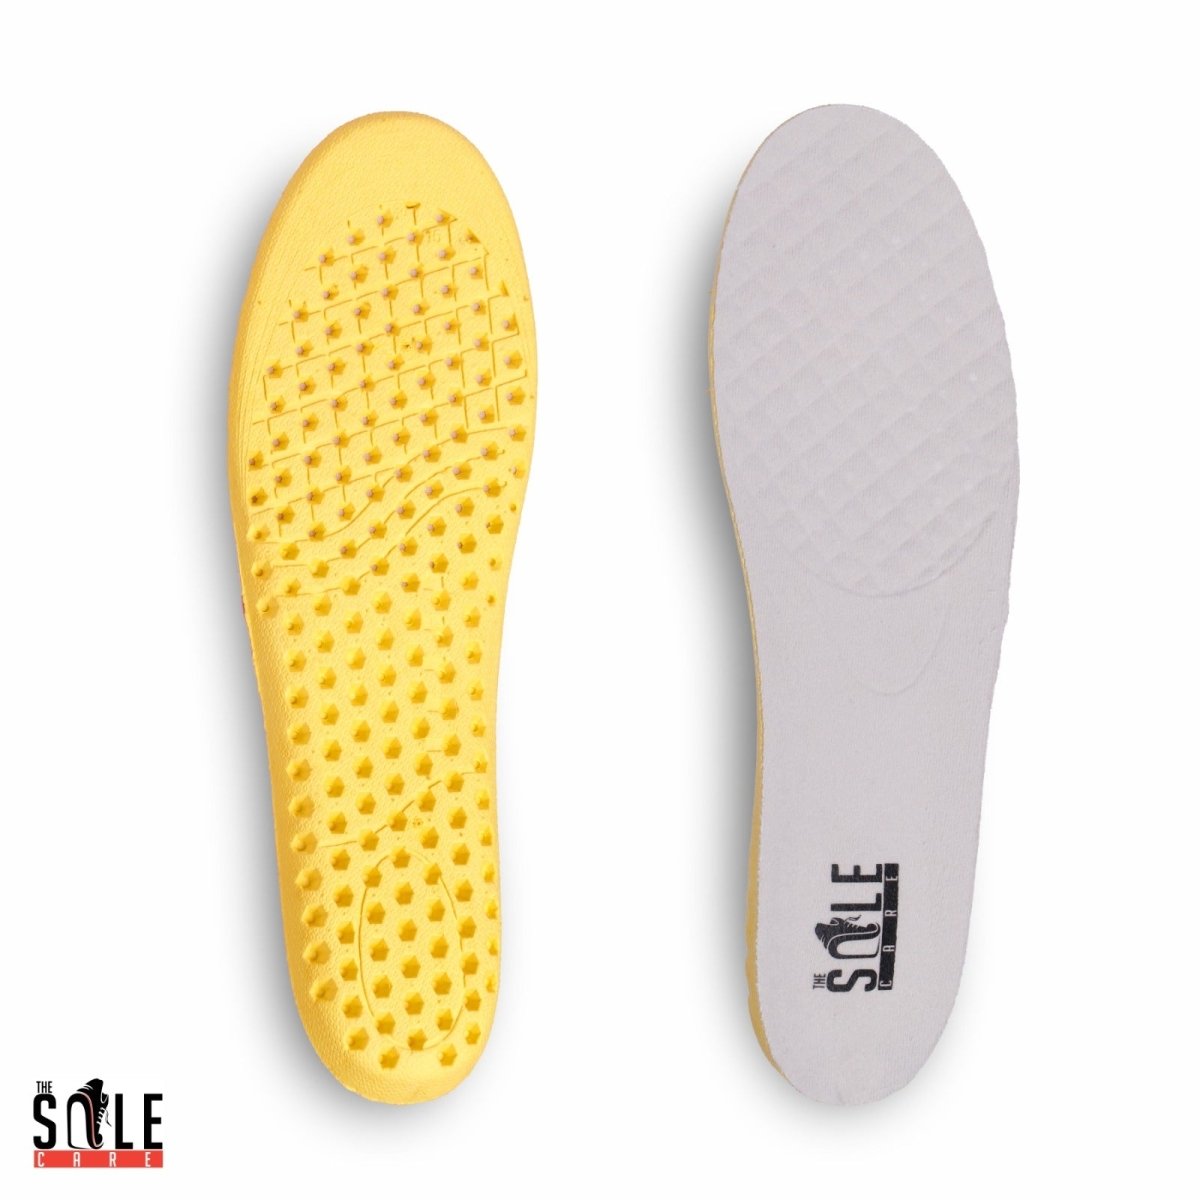 Height Increase Honeycomb Insoles For Women & Men Shoe Insole- #Royalkart#Shoe insole